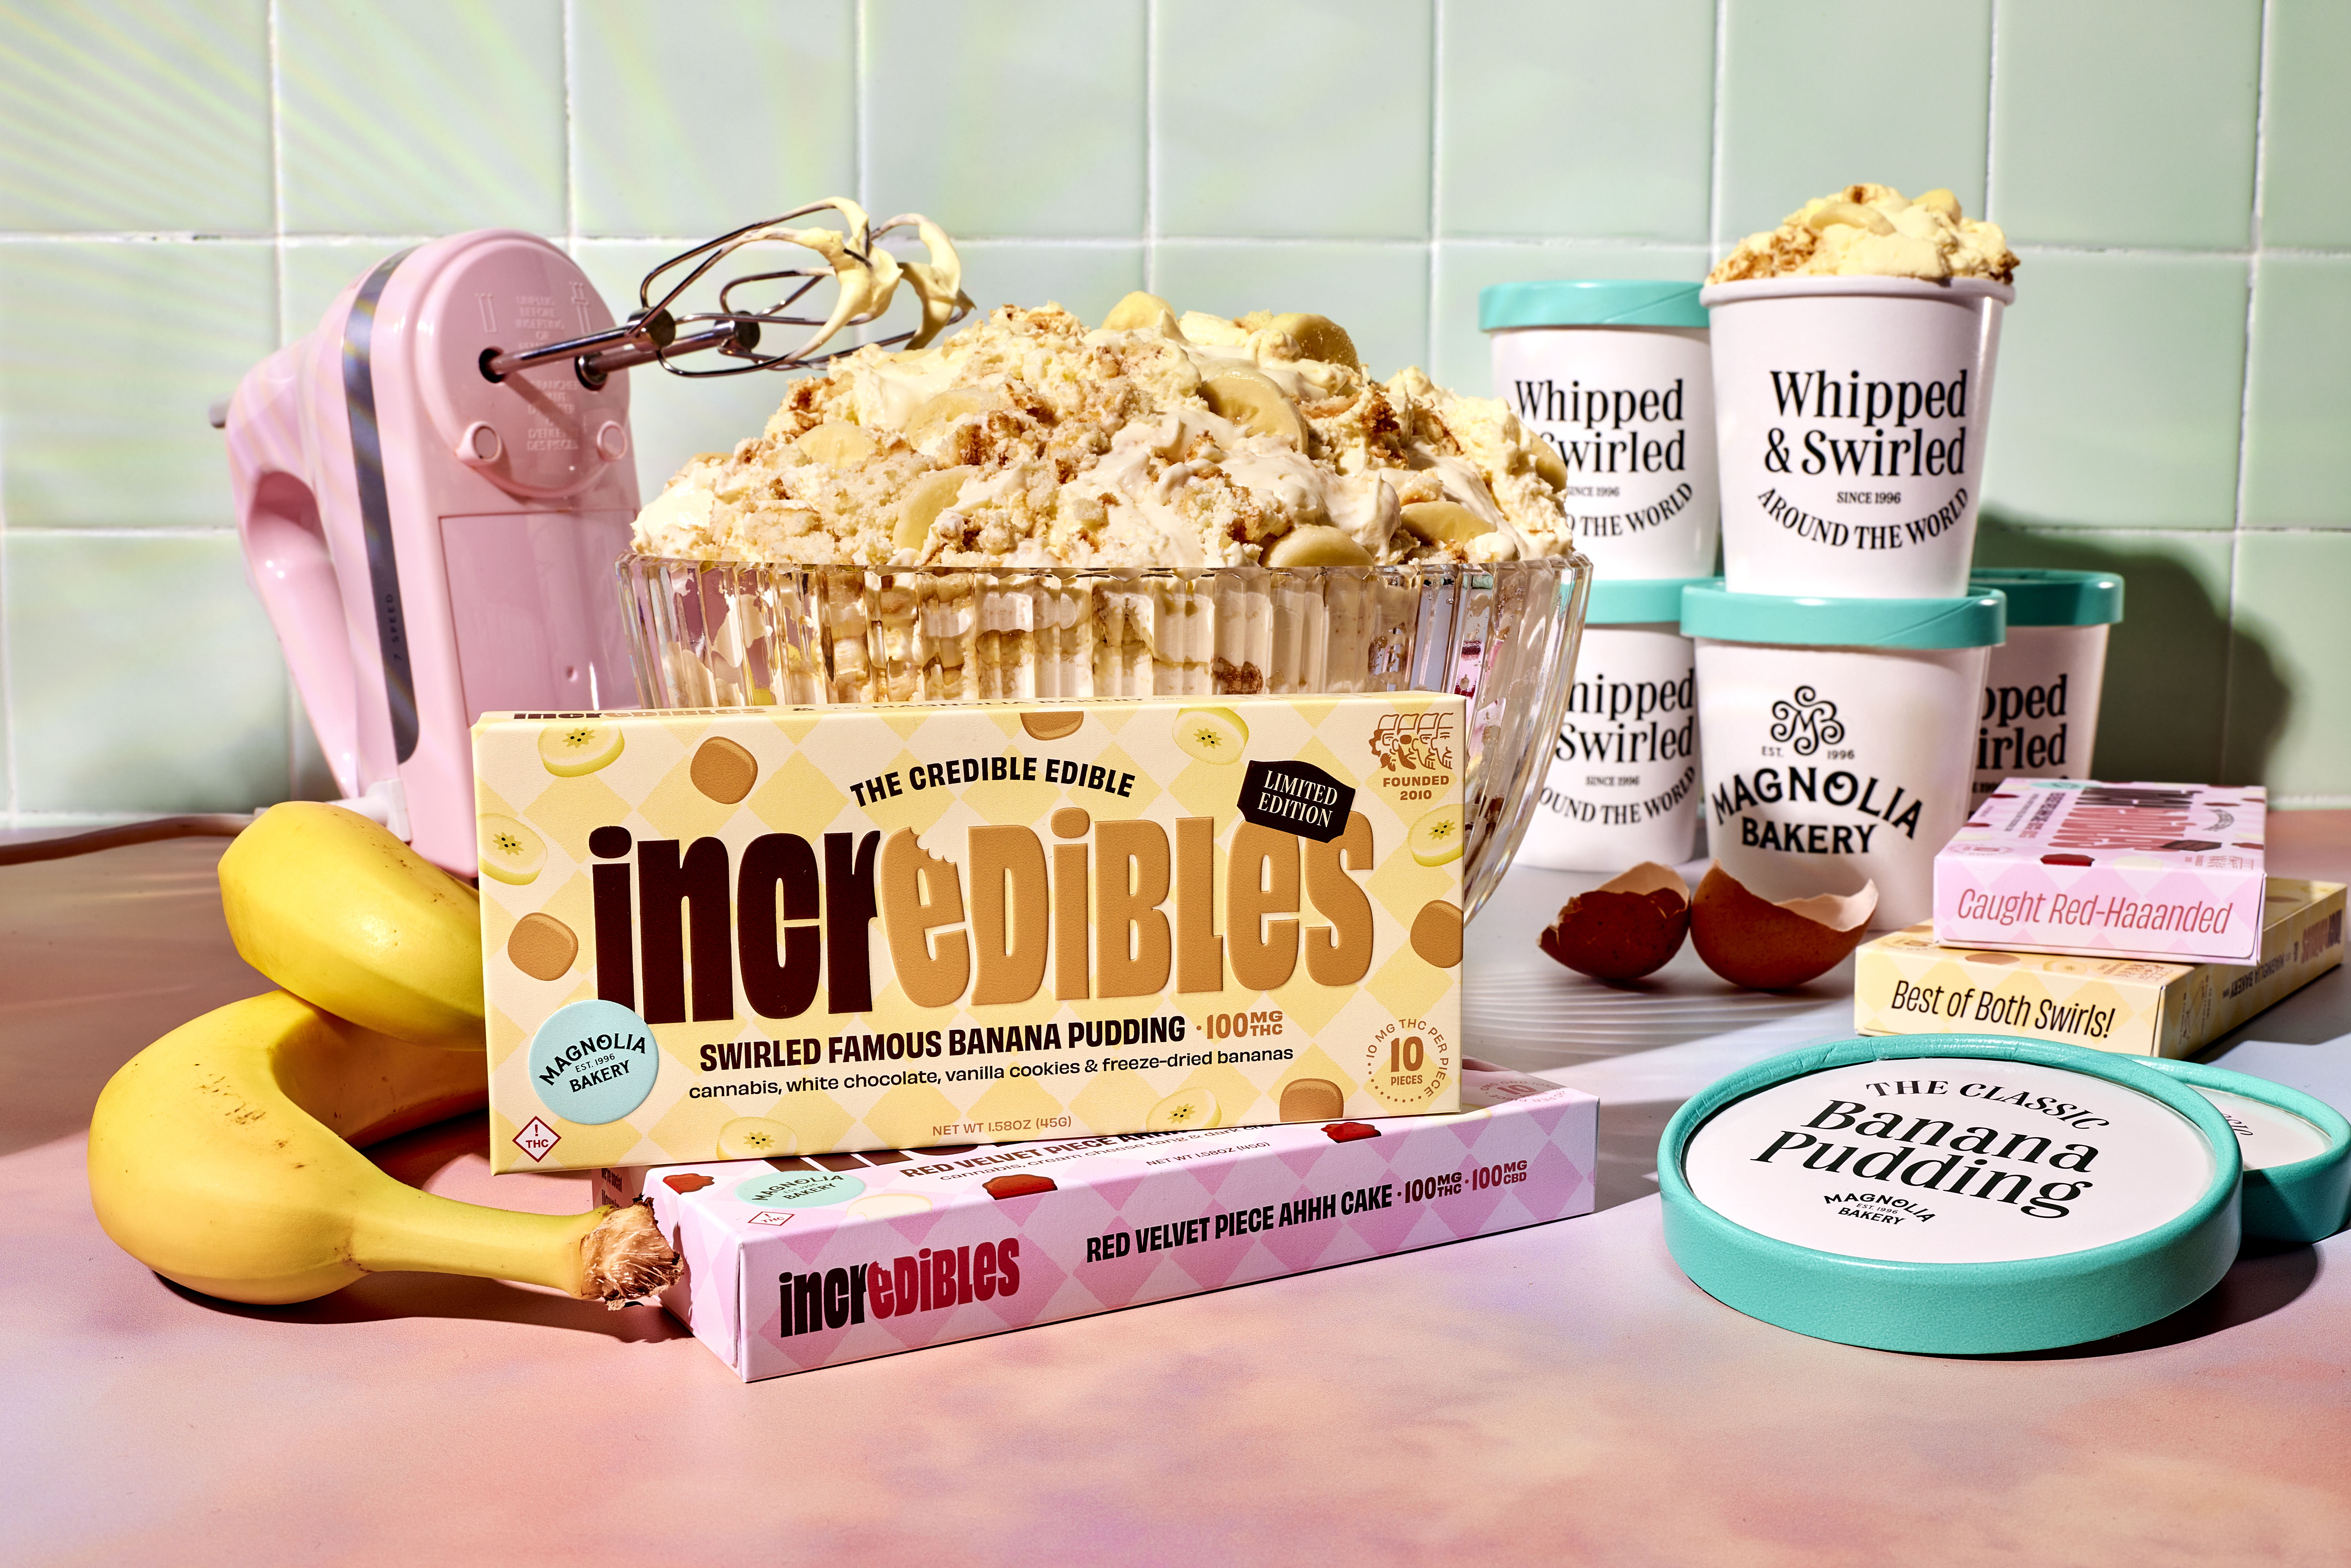 incredibles chocolate bars inspired by Magnolia Bakery